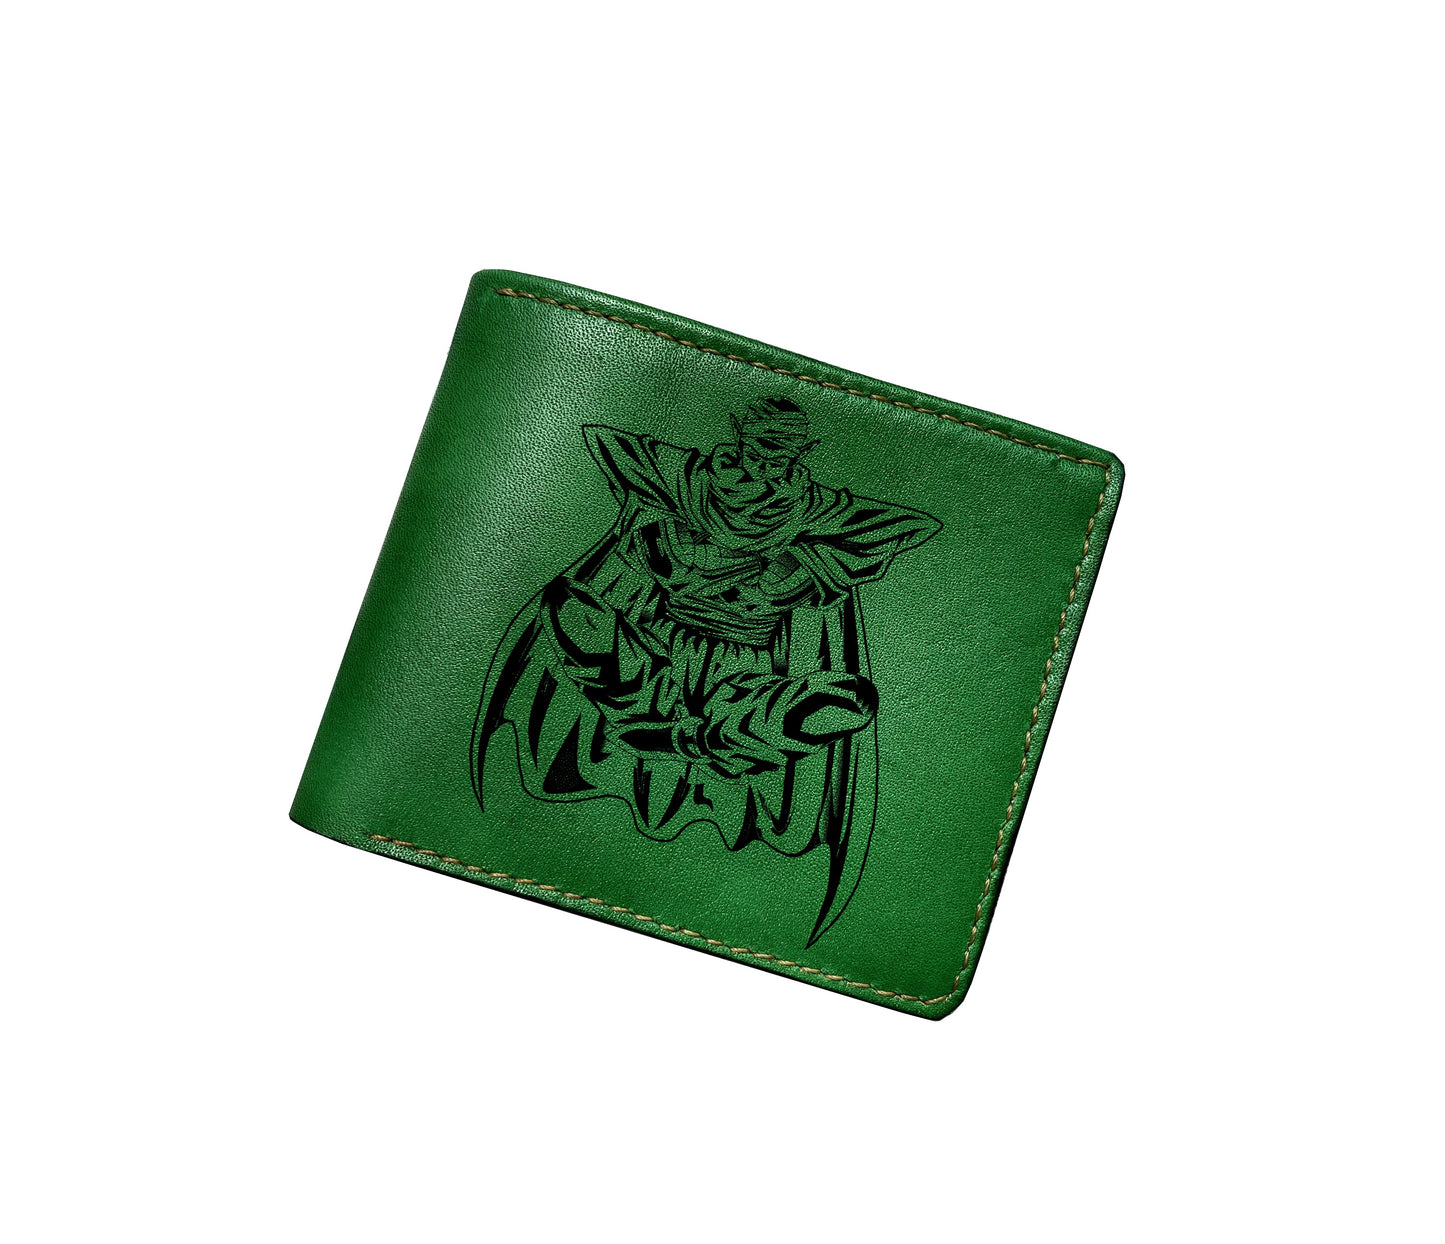 Mayan Corner - Dragon ball characters drawing leather wallet, fan art leather gift for men, wallet for him, leather anniversary present ideas - Piccolo Super Namekian